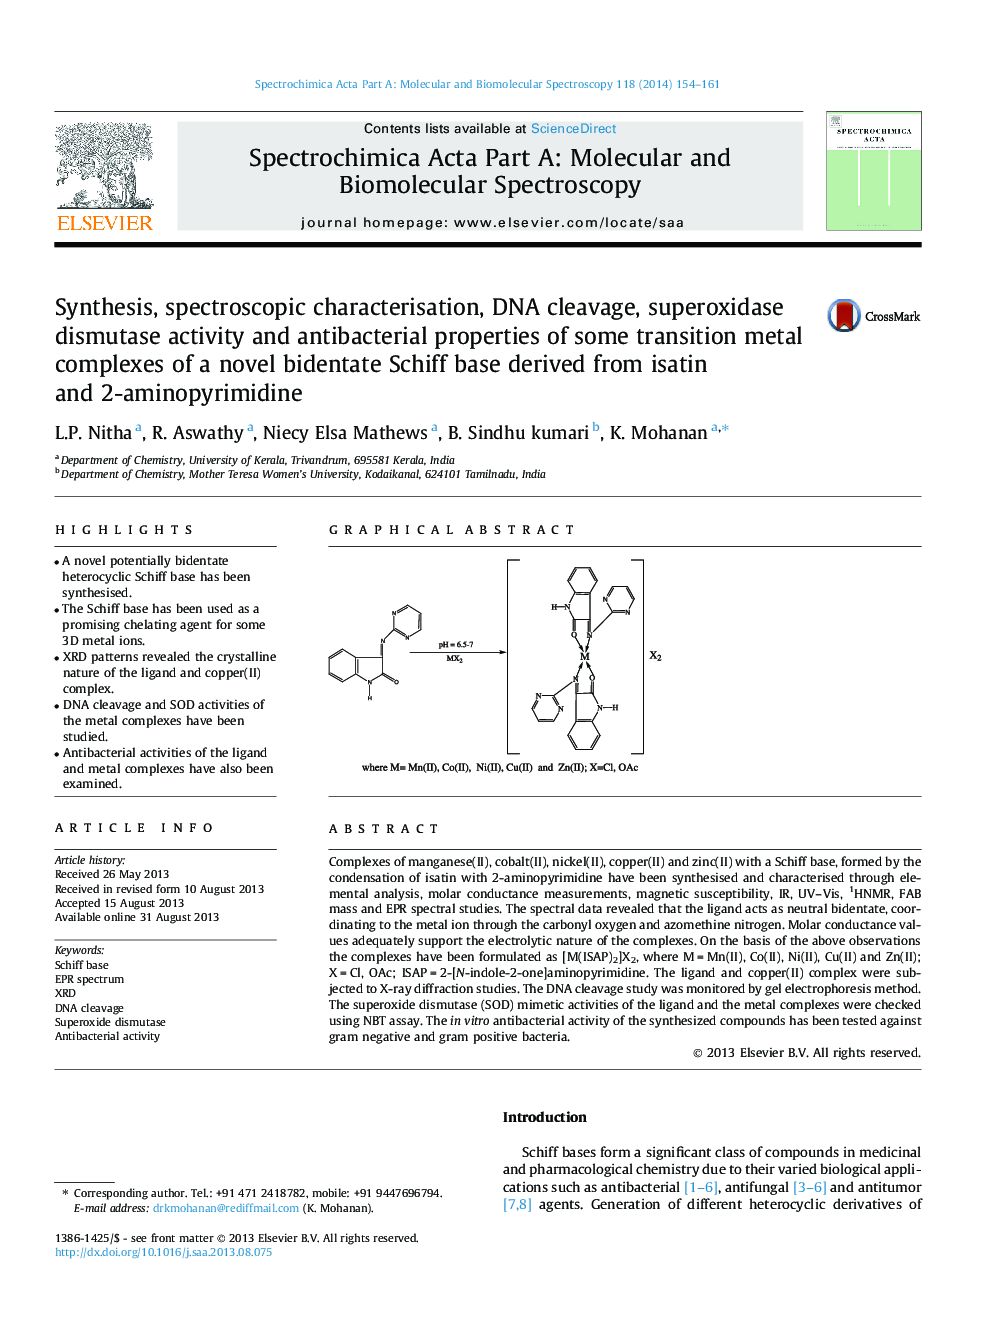 Synthesis, spectroscopic characterisation, DNA cleavage, superoxidase dismutase activity and antibacterial properties of some transition metal complexes of a novel bidentate Schiff base derived from isatin and 2-aminopyrimidine